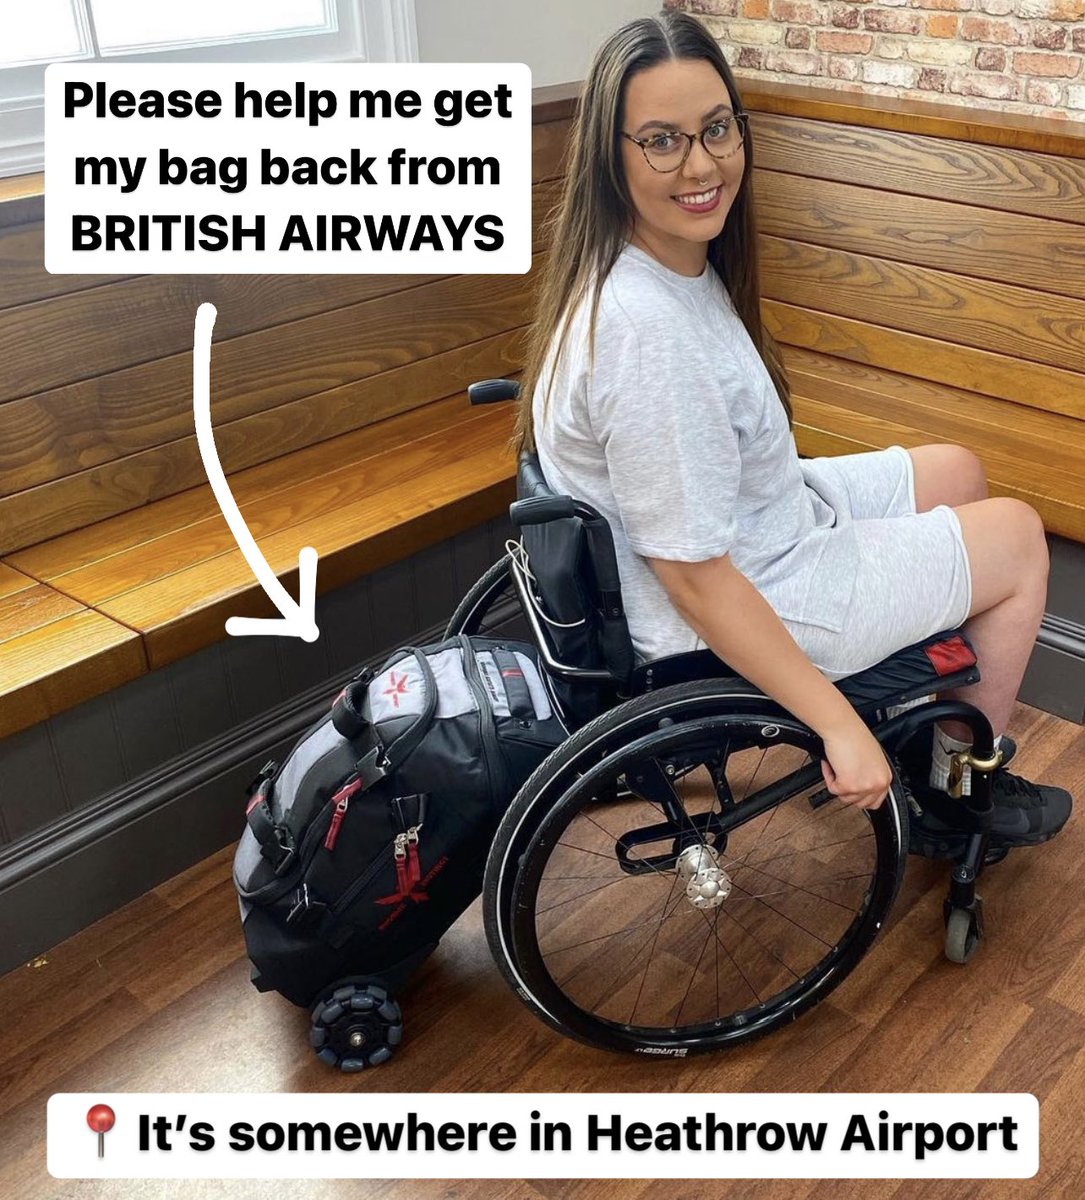 😫 @British_Airways you lost my suitcase and I’m getting no where with retrieving it. The bag is an integral part of my travel as a w/c user. Its classified as a medical device. Heathrow won’t release my bag and the online portal is saying it hasn’t been located yet. Please help?